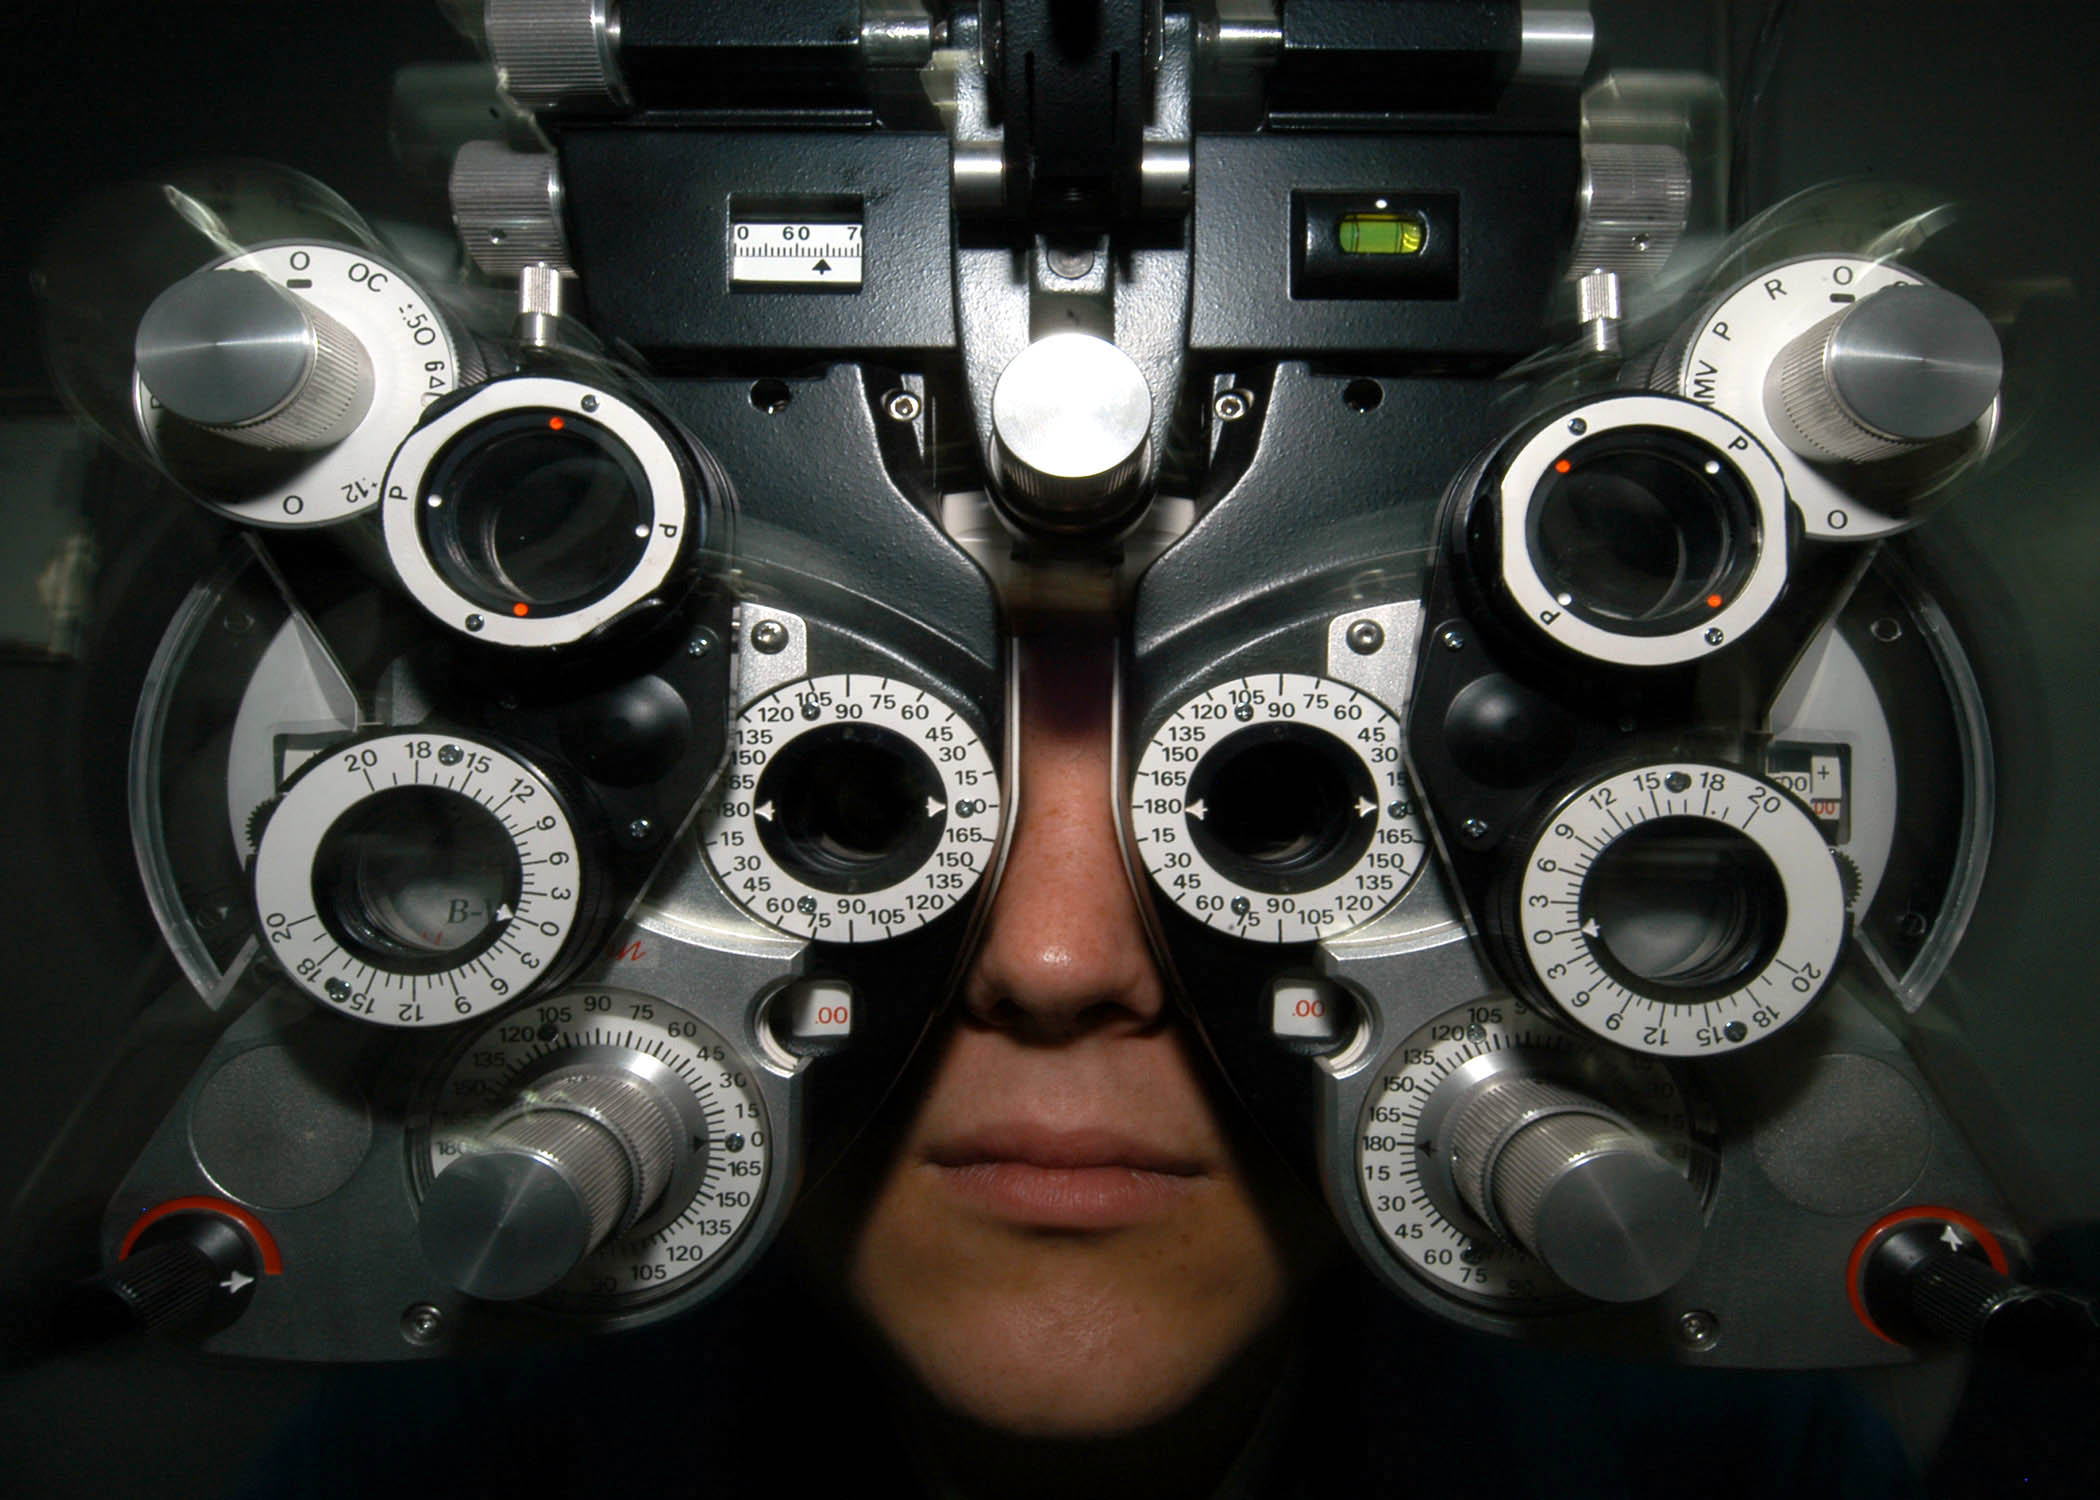 Make an Appointment with an Optometrist